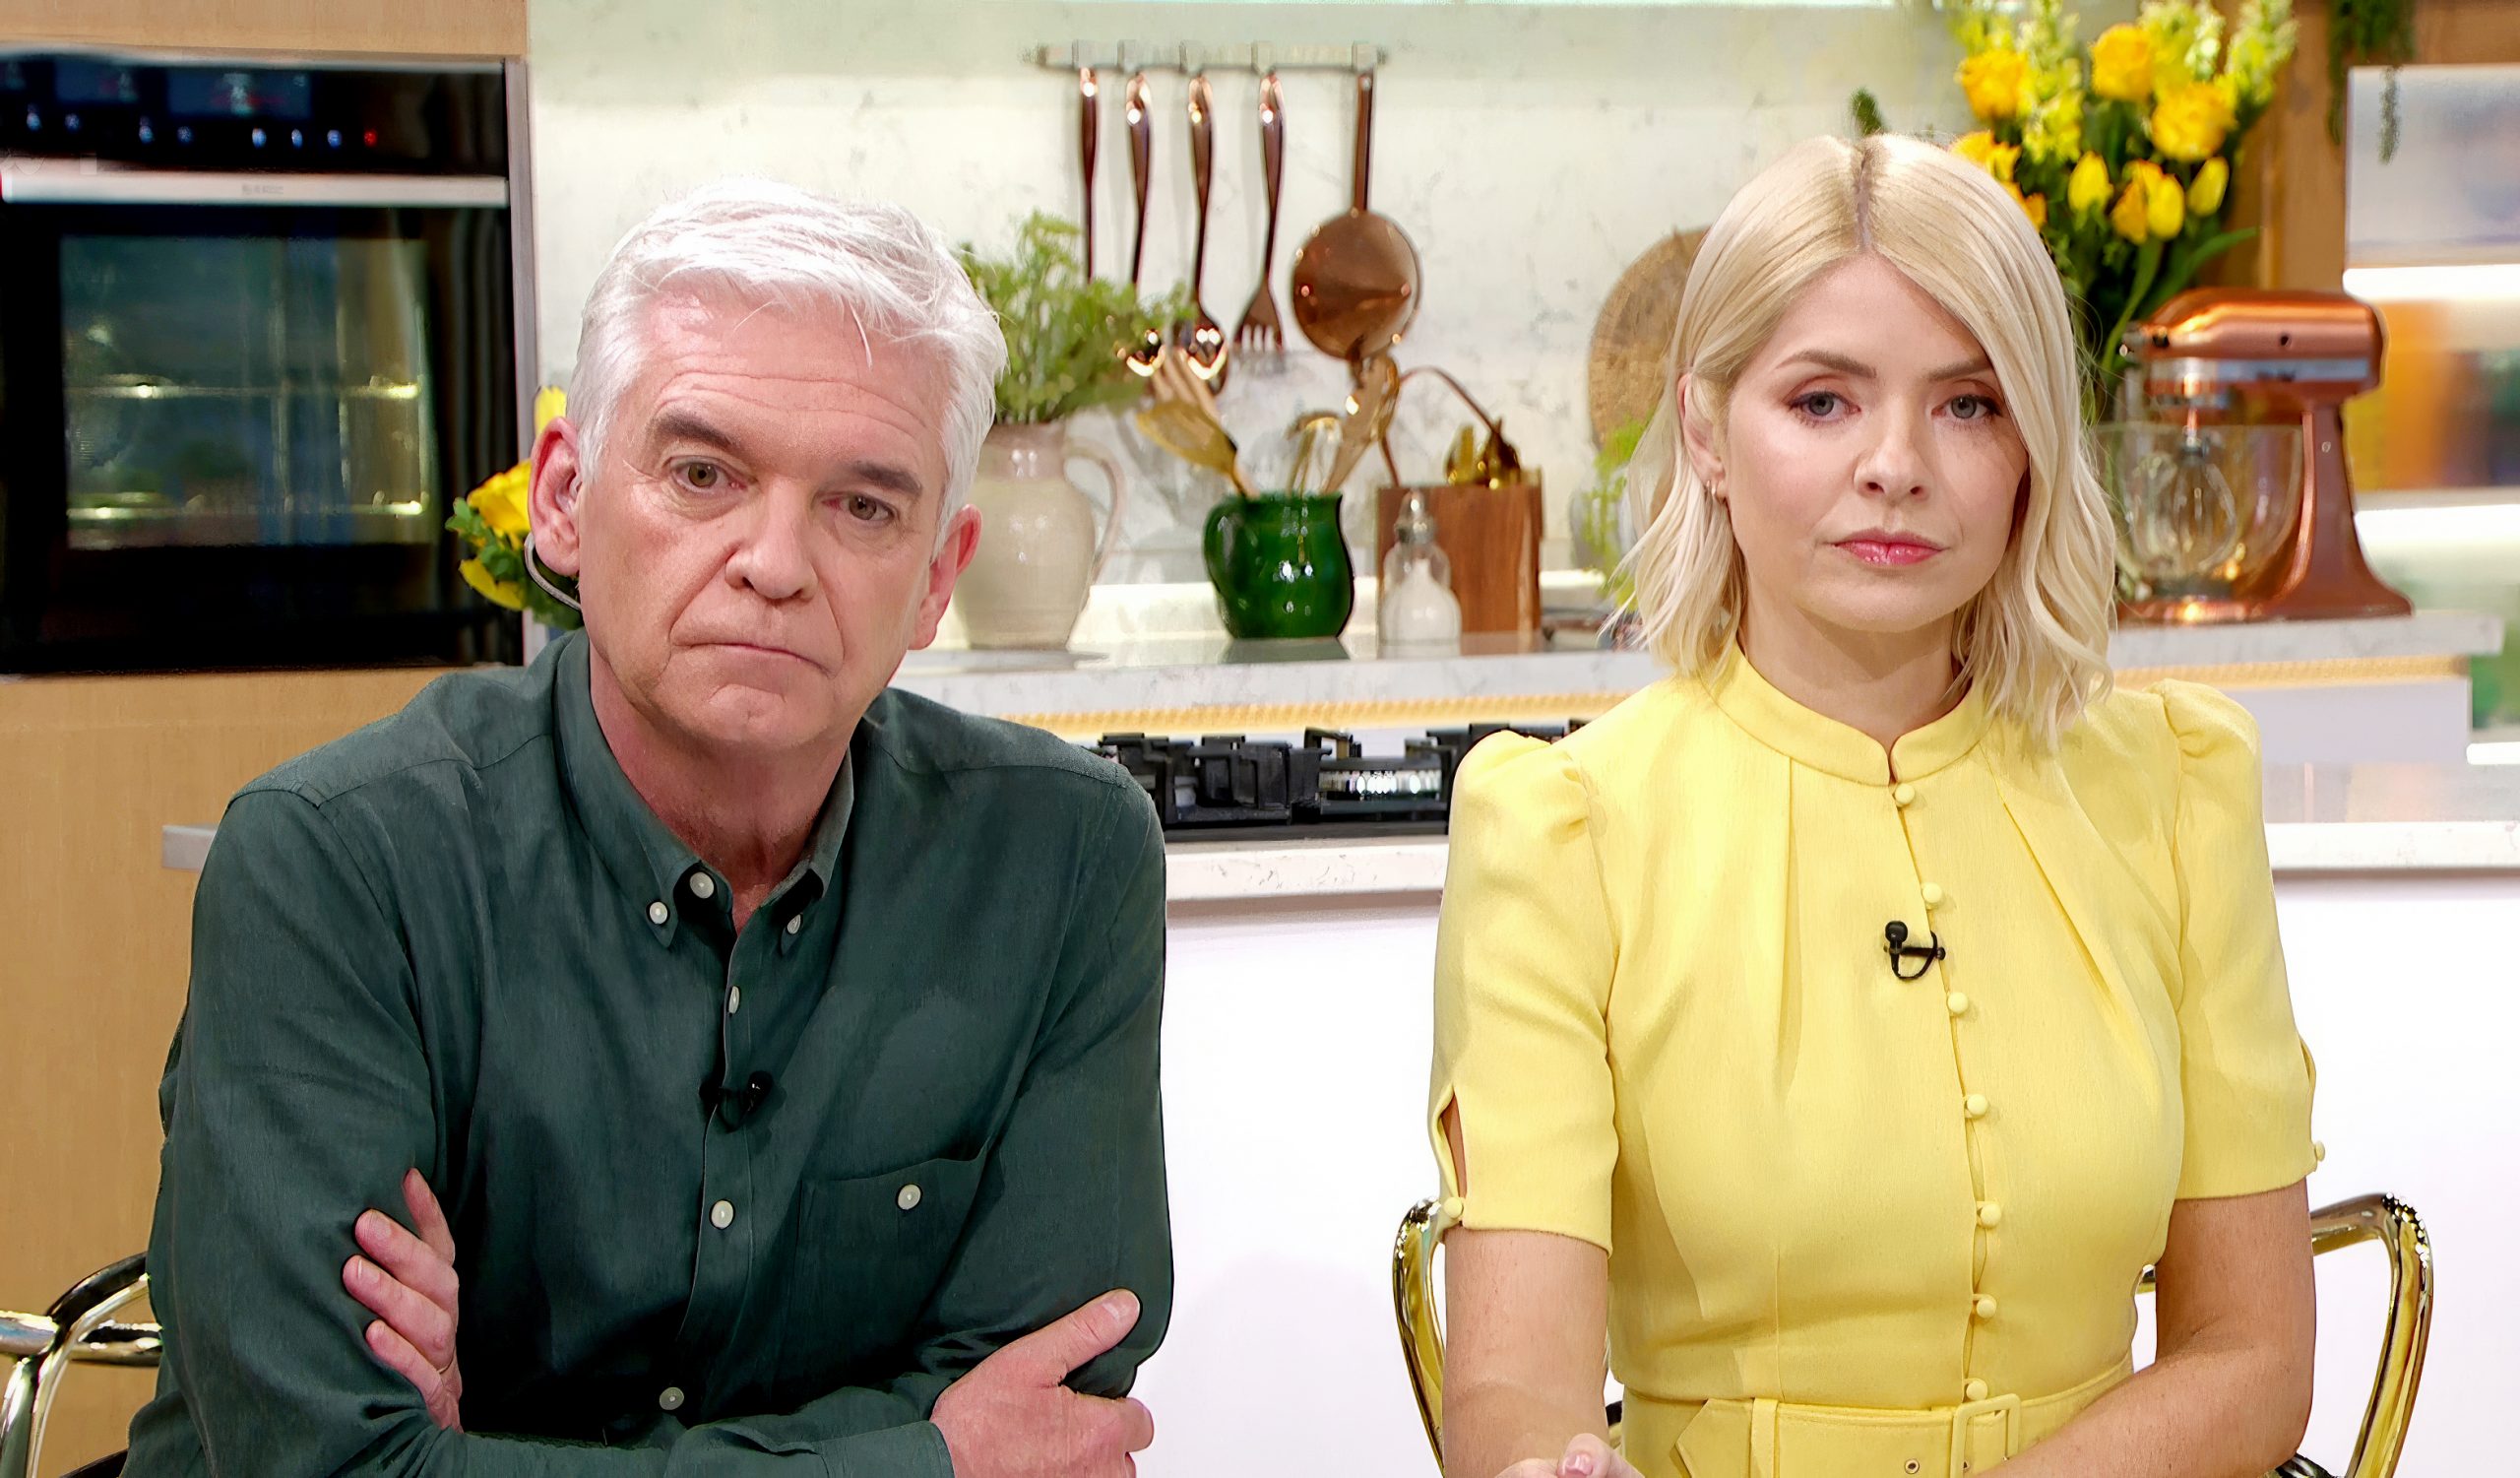 Shamed Phillip Schofield could still save his career, says top showbiz expert